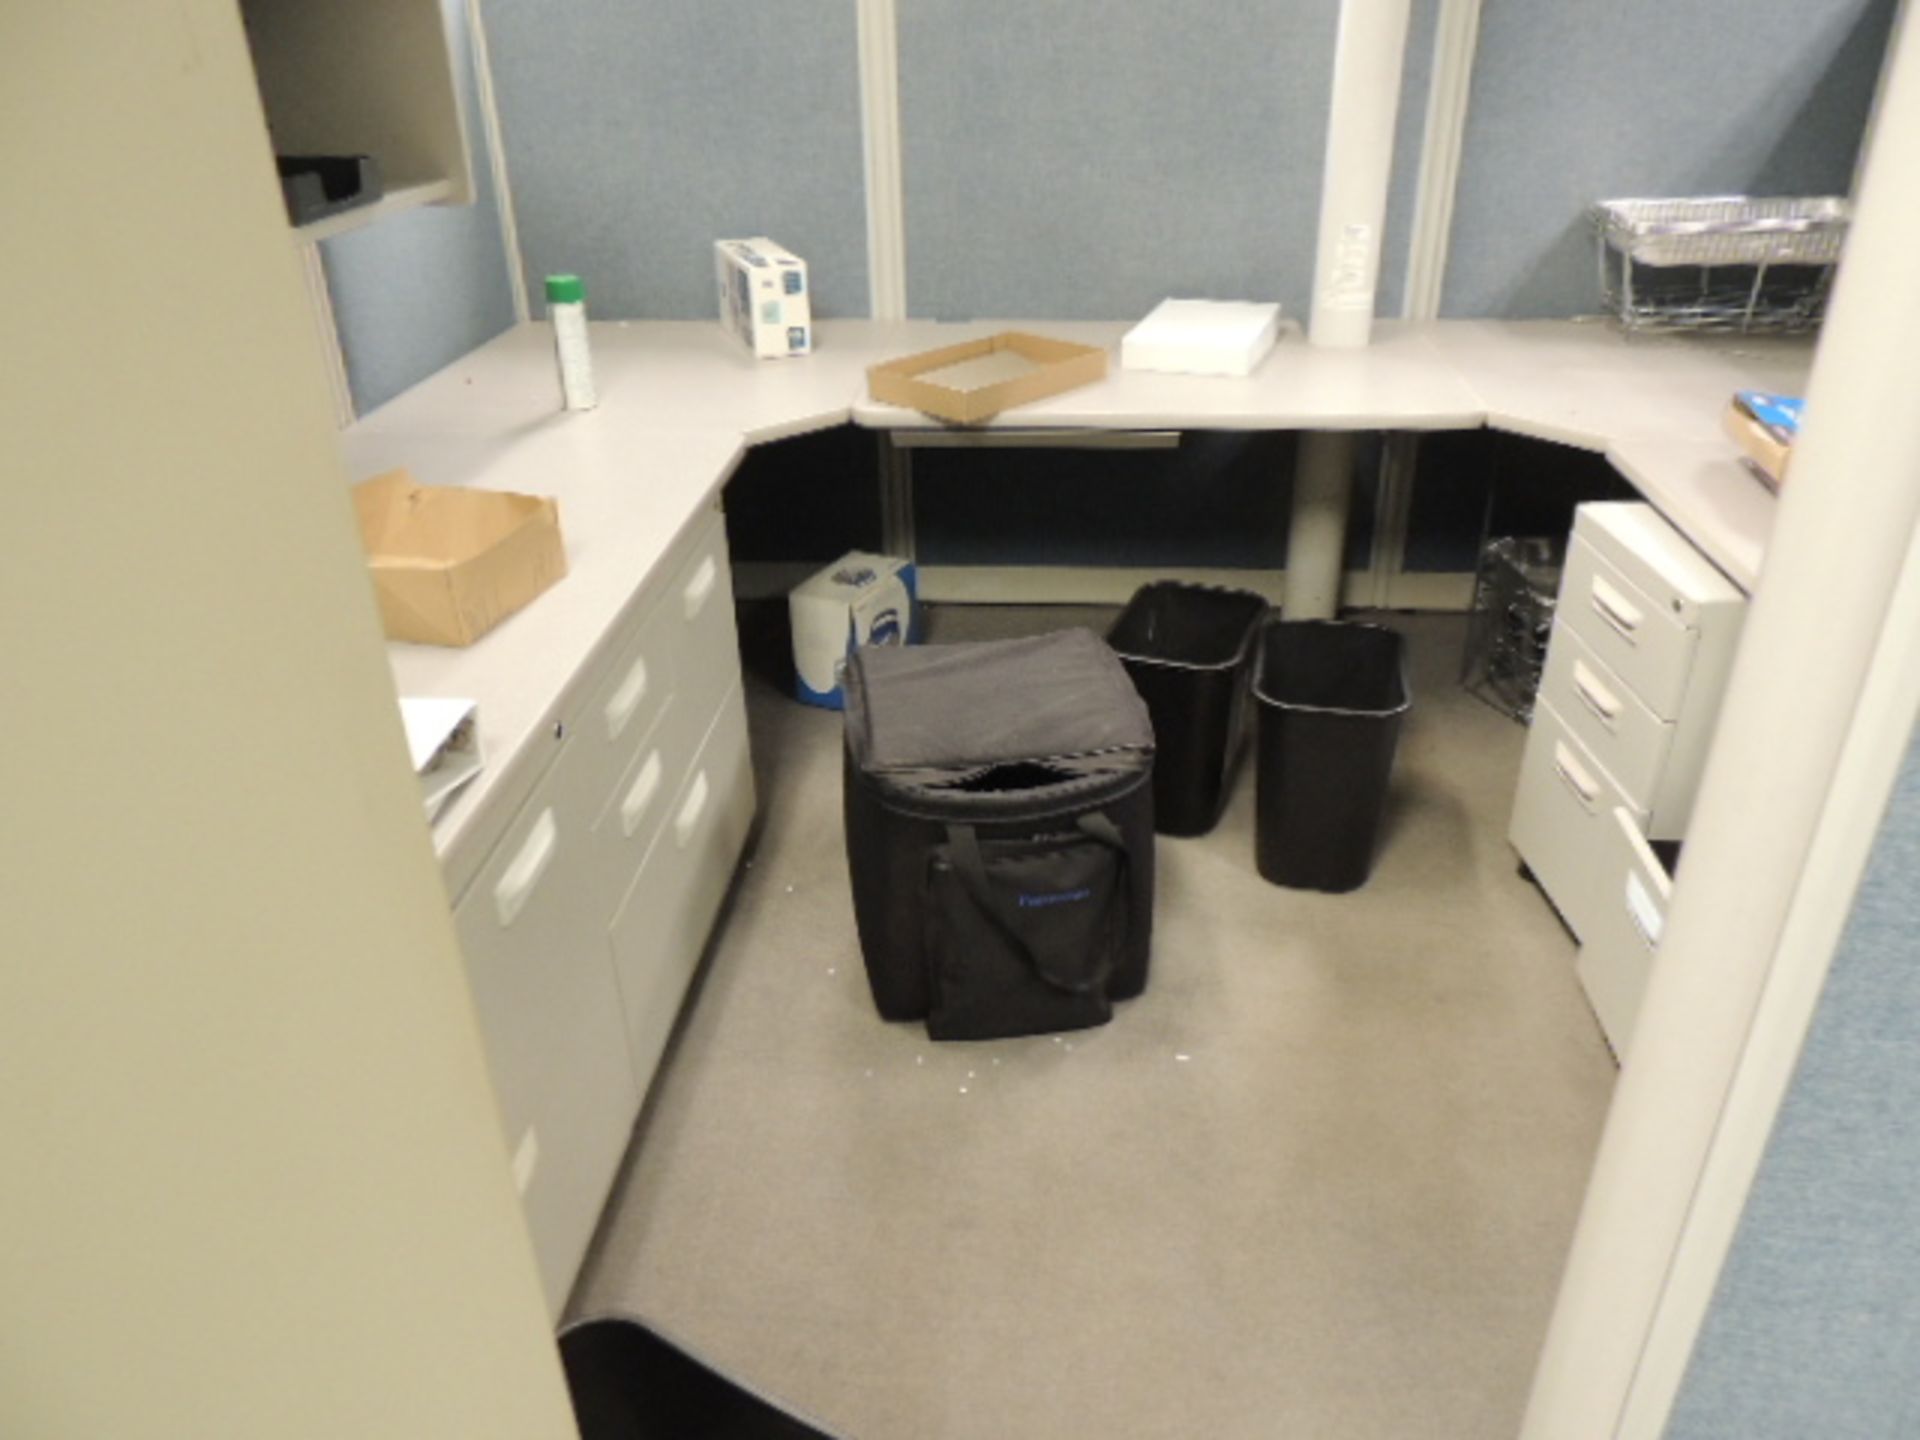 Office Cubicles & Contents. Lot: (3) cubicles 10'x12'x8' with metal desks, file cabinet and - Image 3 of 15